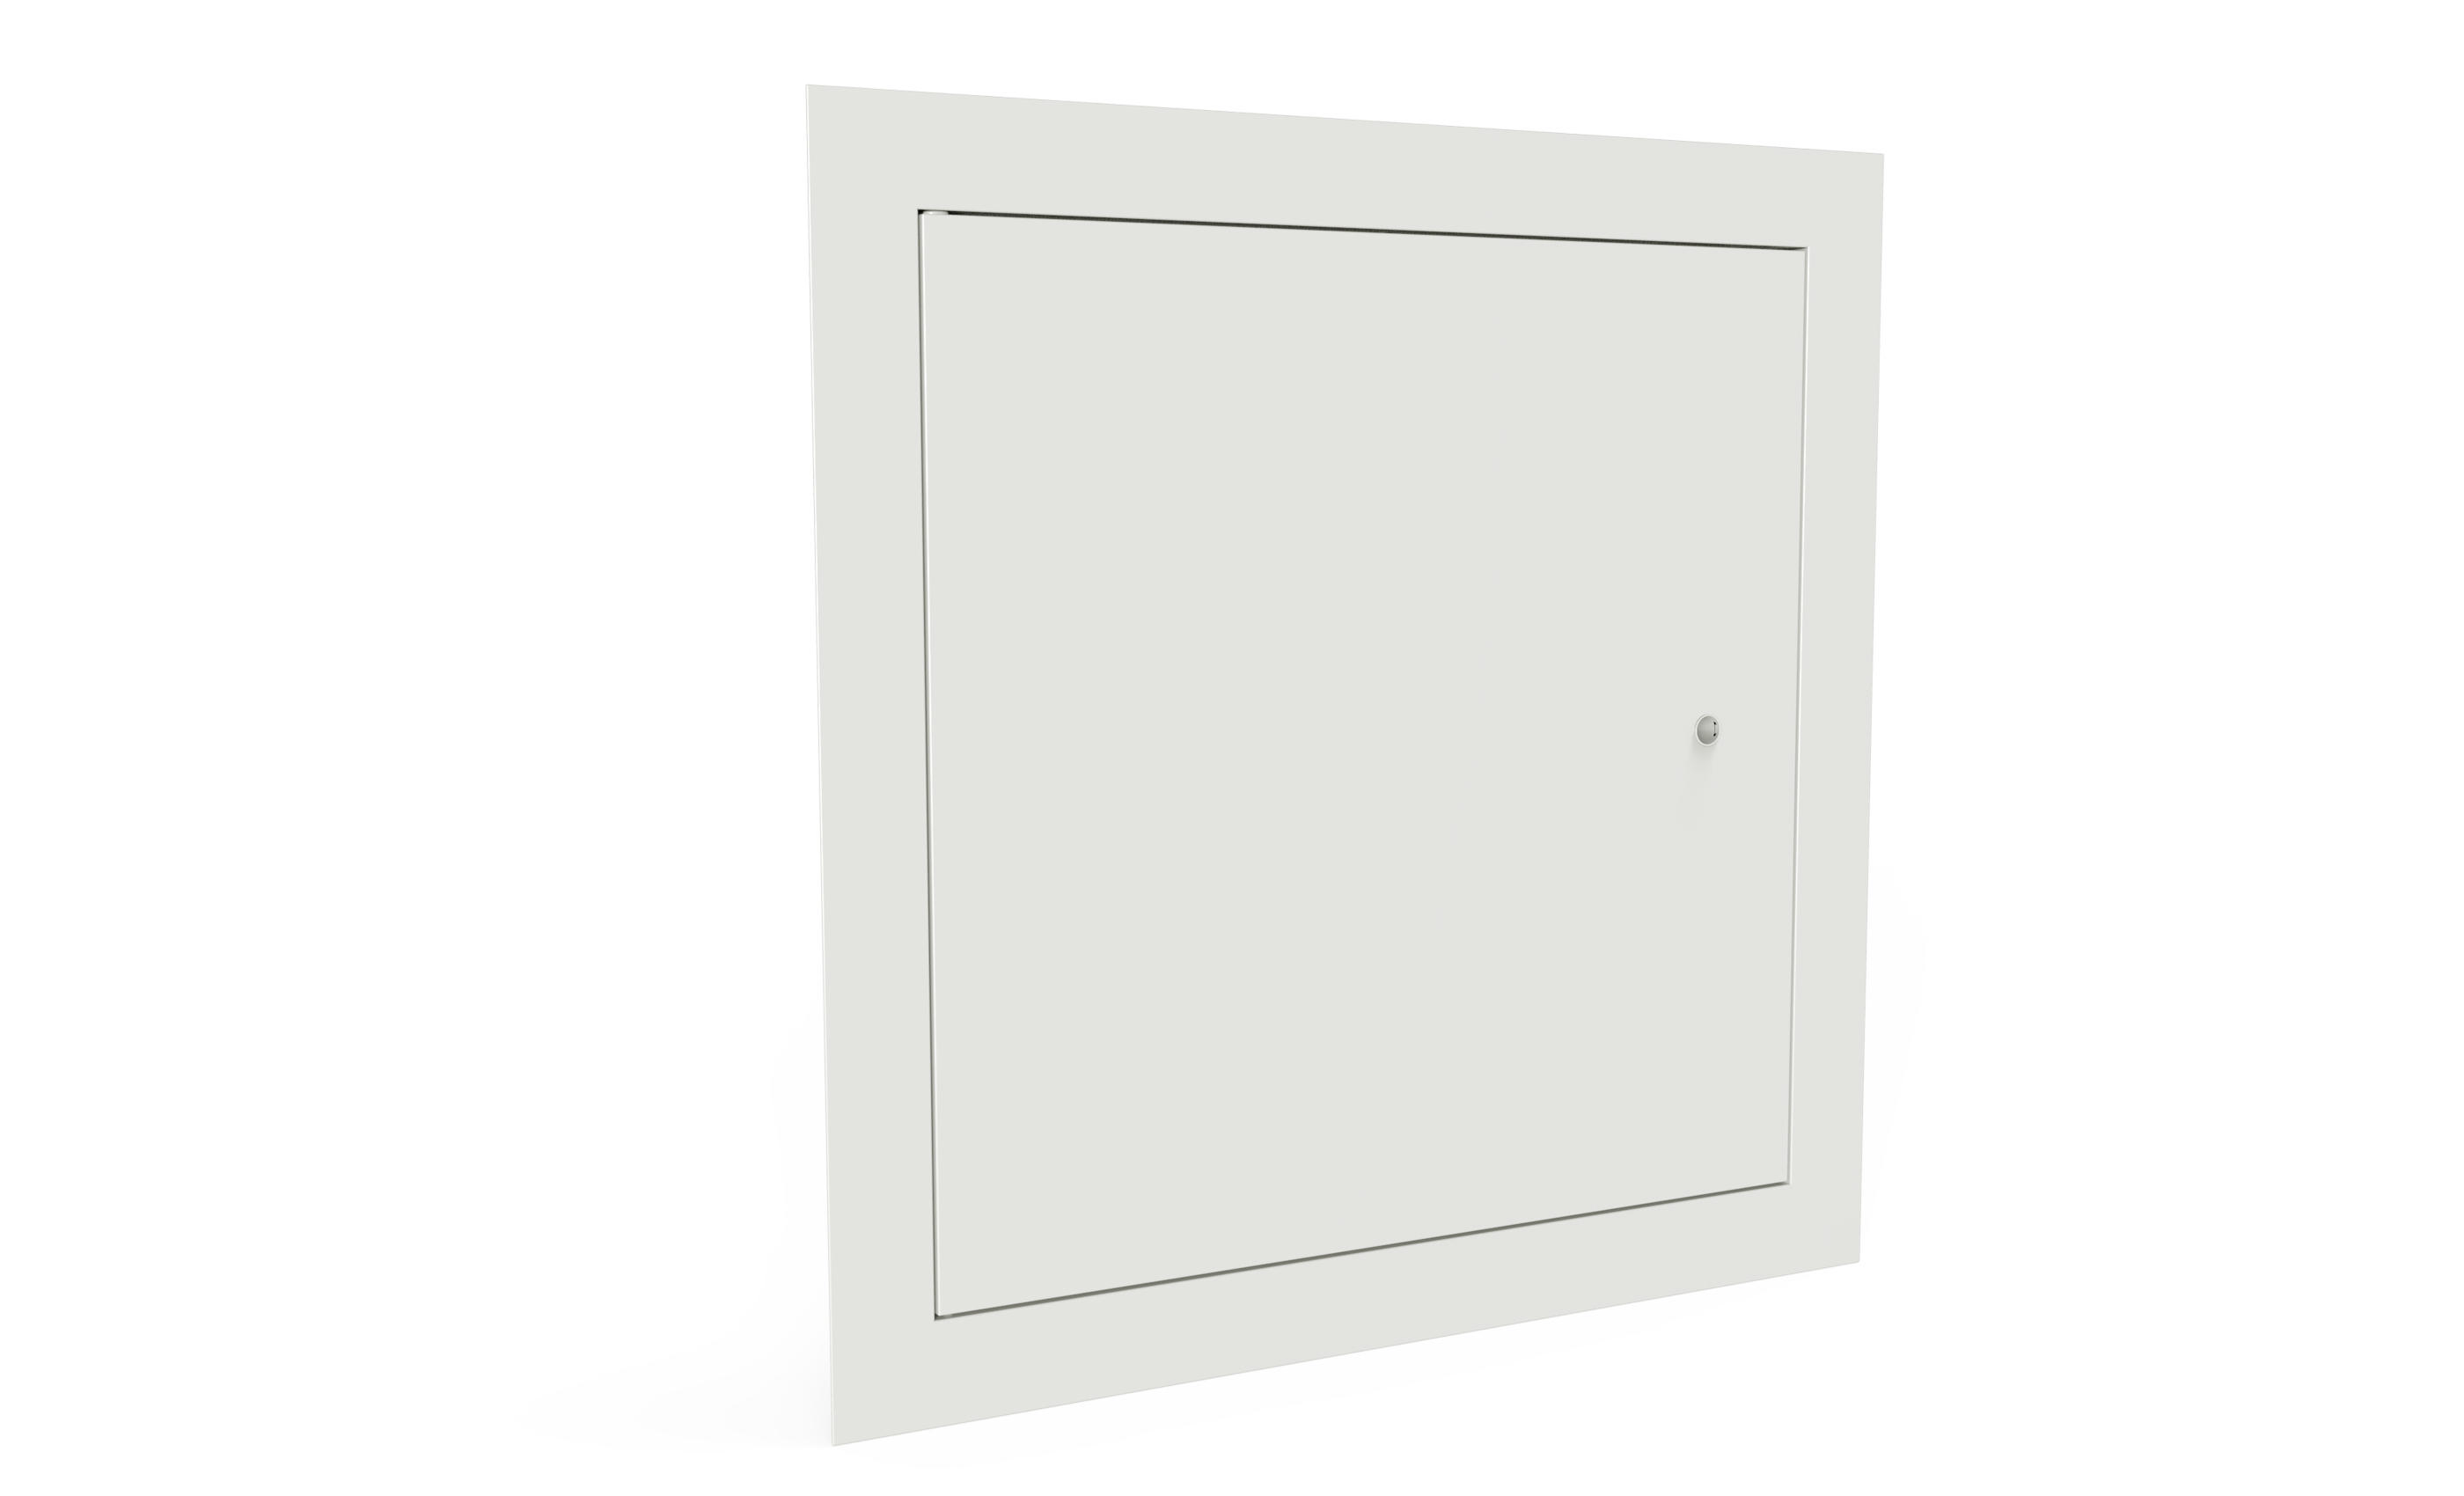 Non fire rated metal access panel